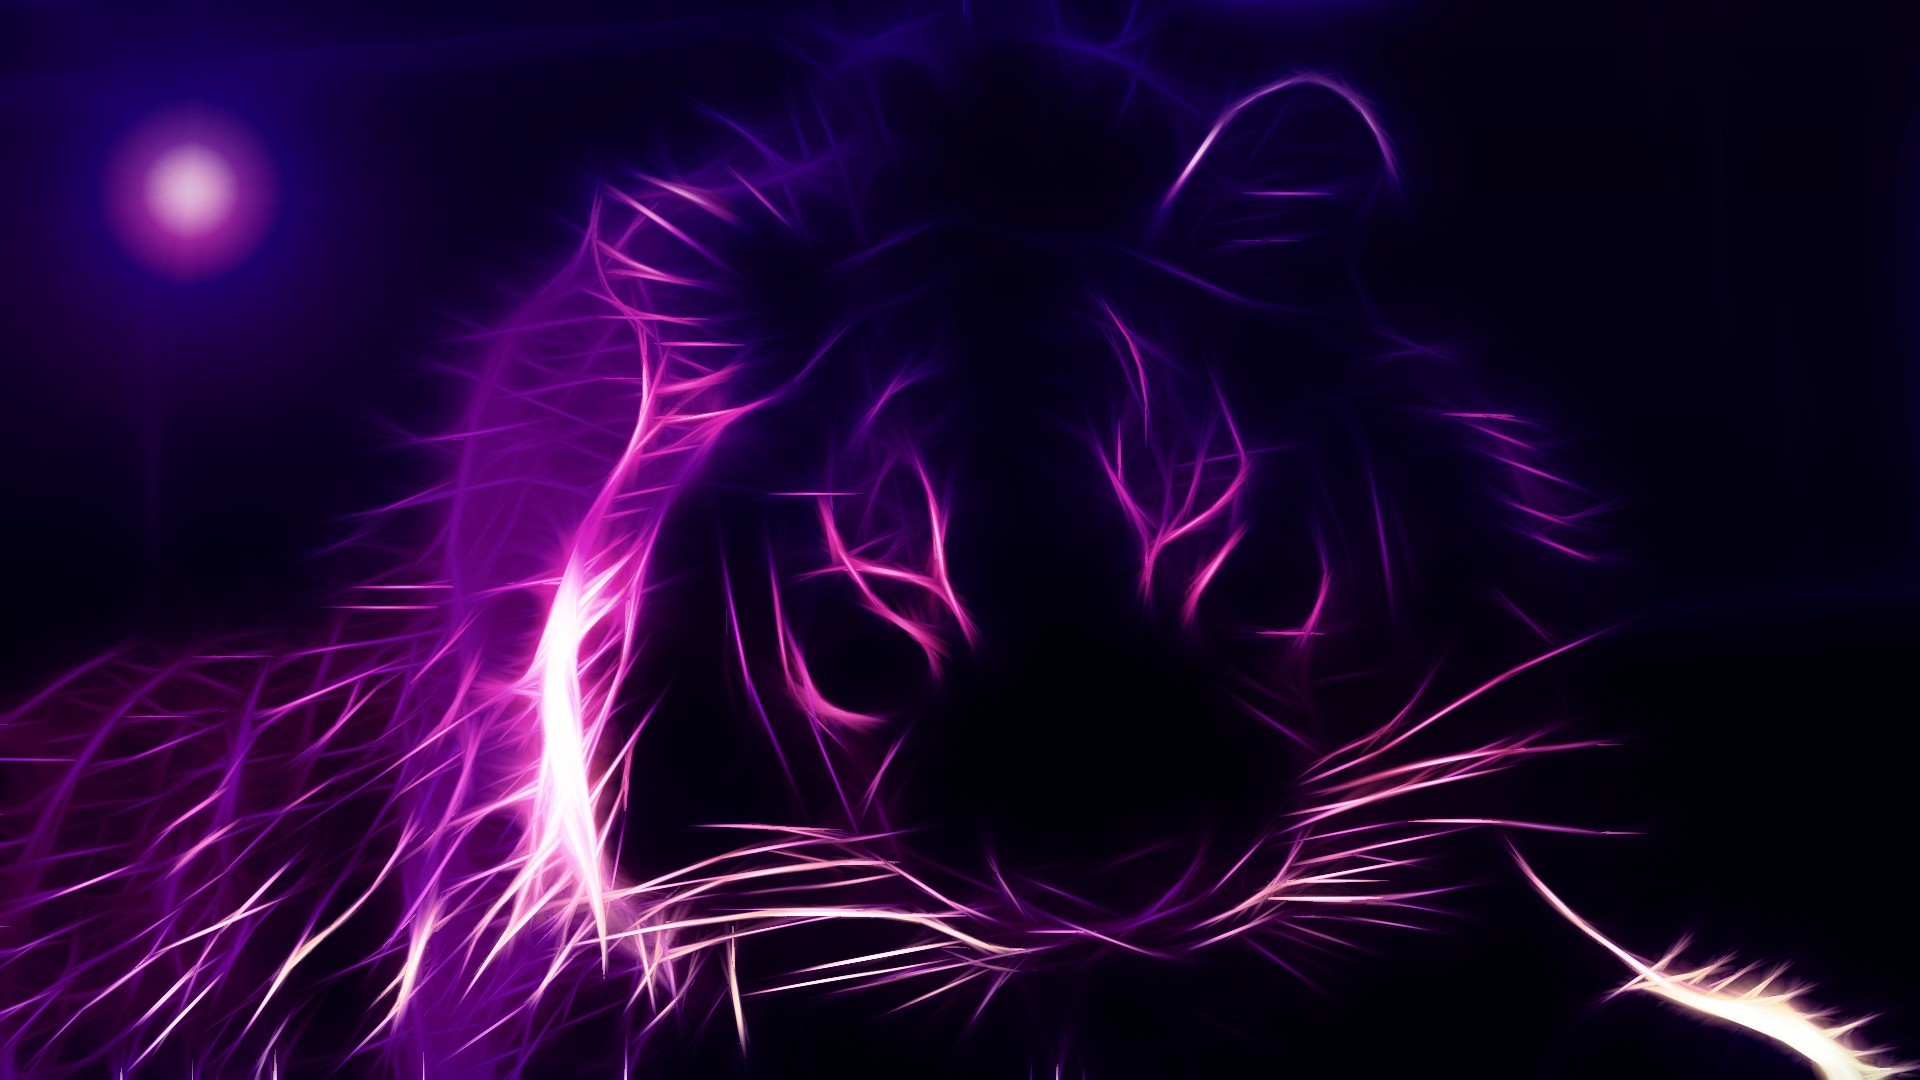 1920x1080 ... wallpapers for pretty purple backgrounds tumblr-1 | Download .